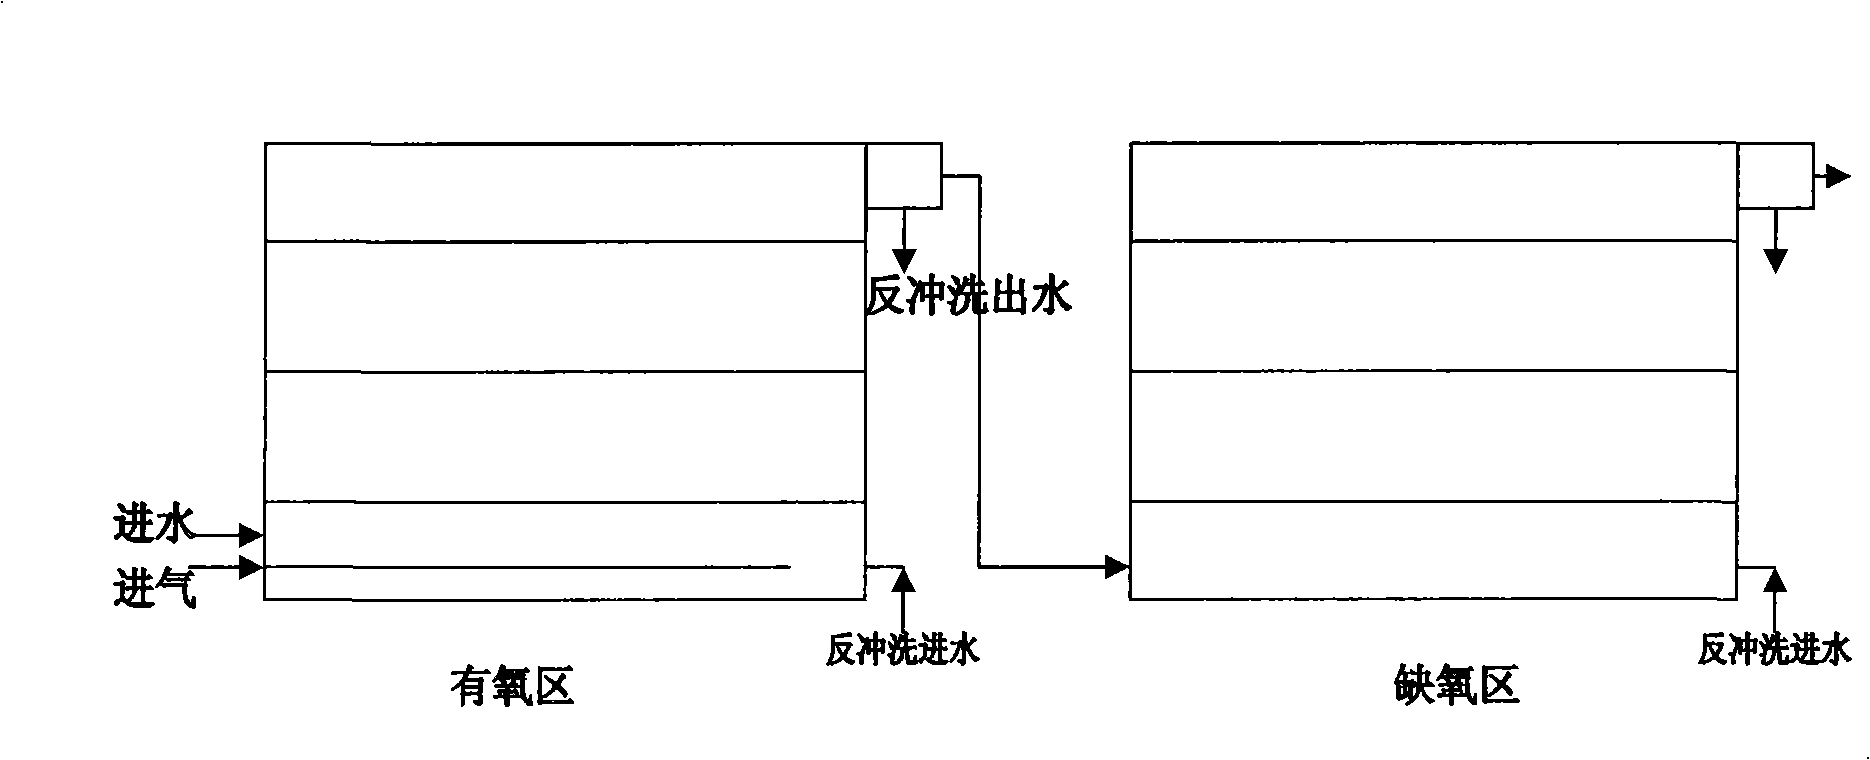 Ammonia nitrogen processing method for hide manufacture wastewater